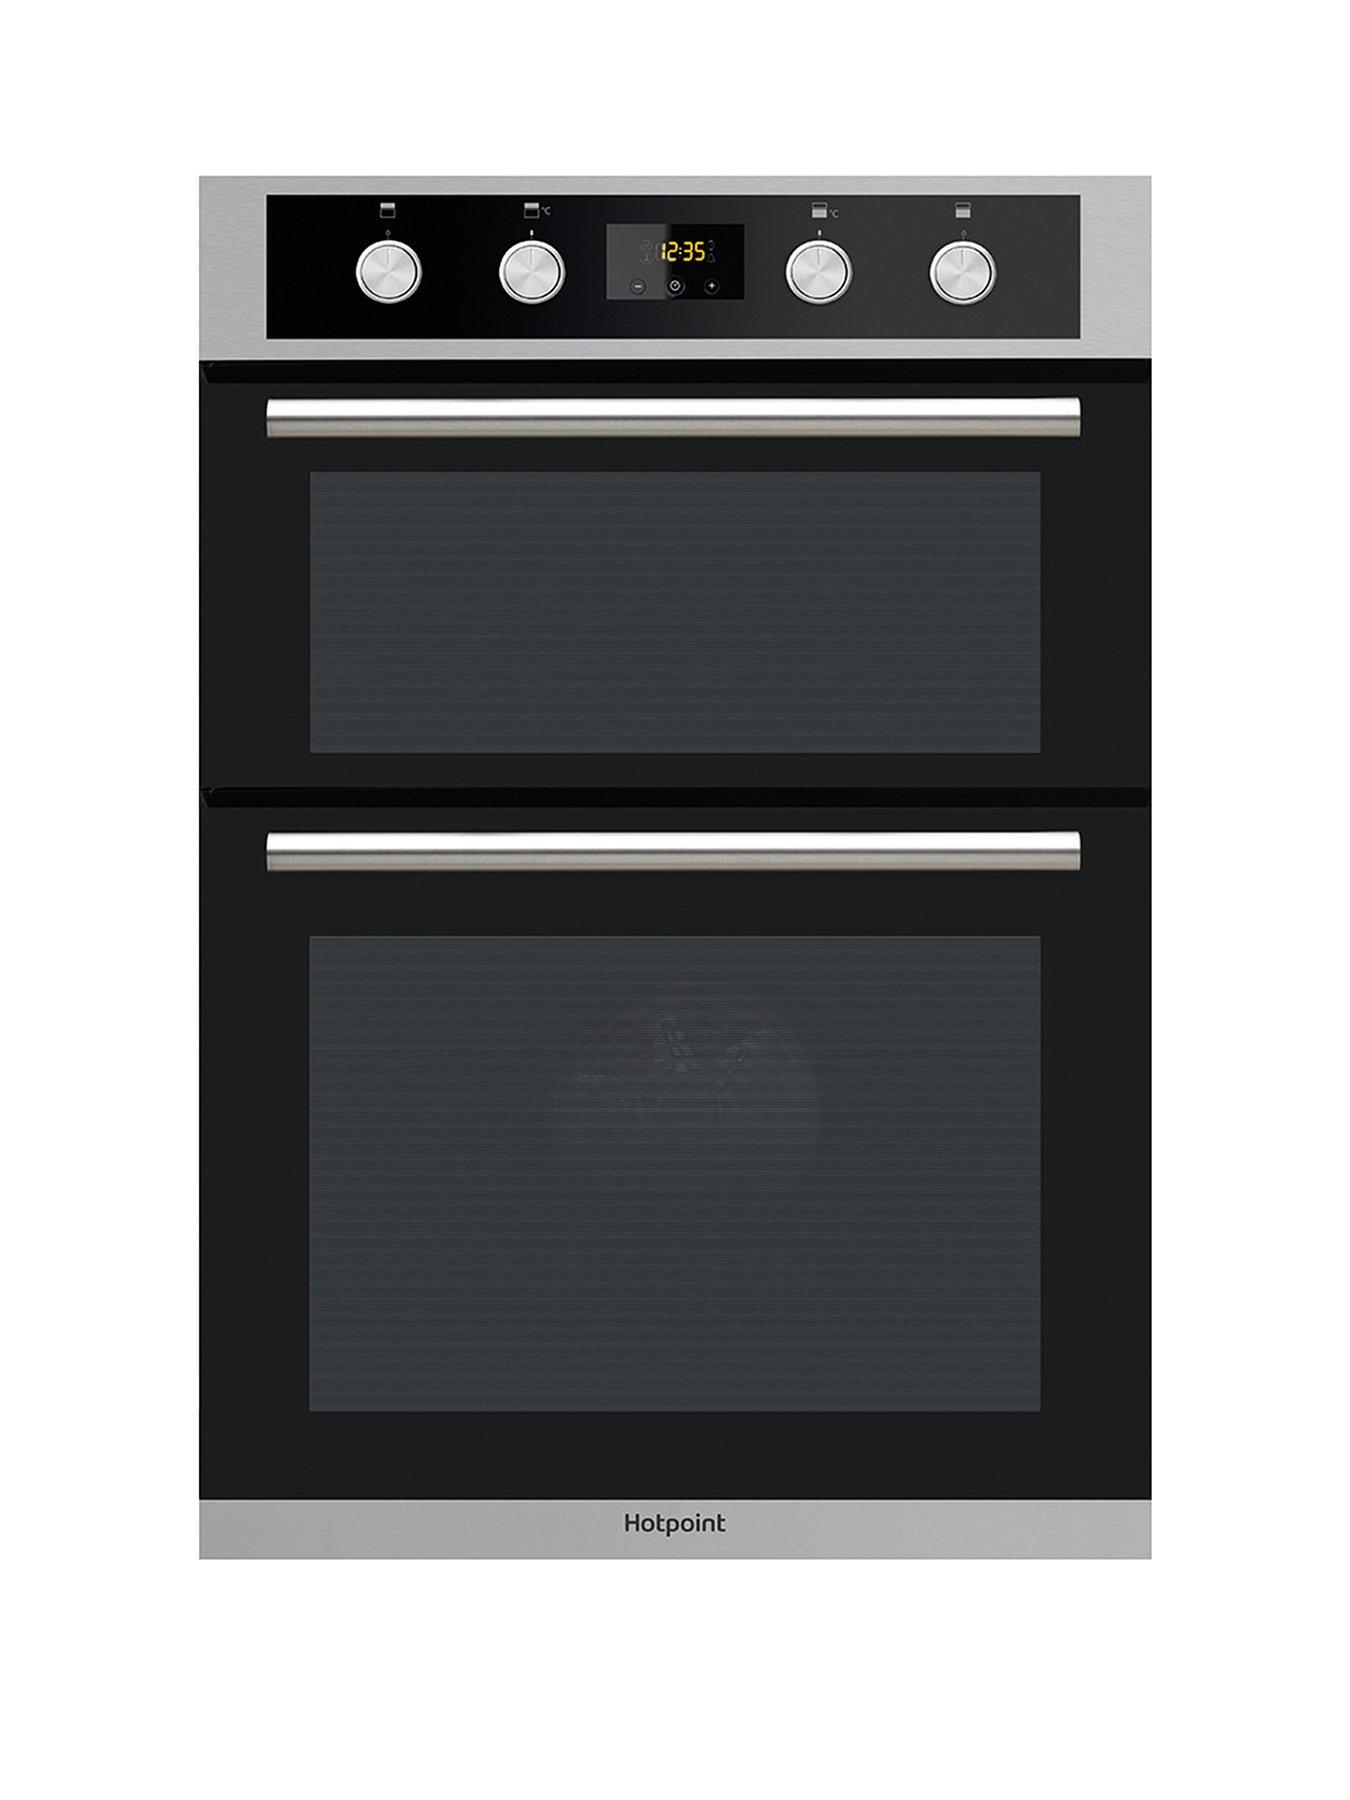 Hotpoint Class 2 Dd2844Cix 60Cm Built-In Double Electric Oven - Stainless Steel/Black - Oven Only